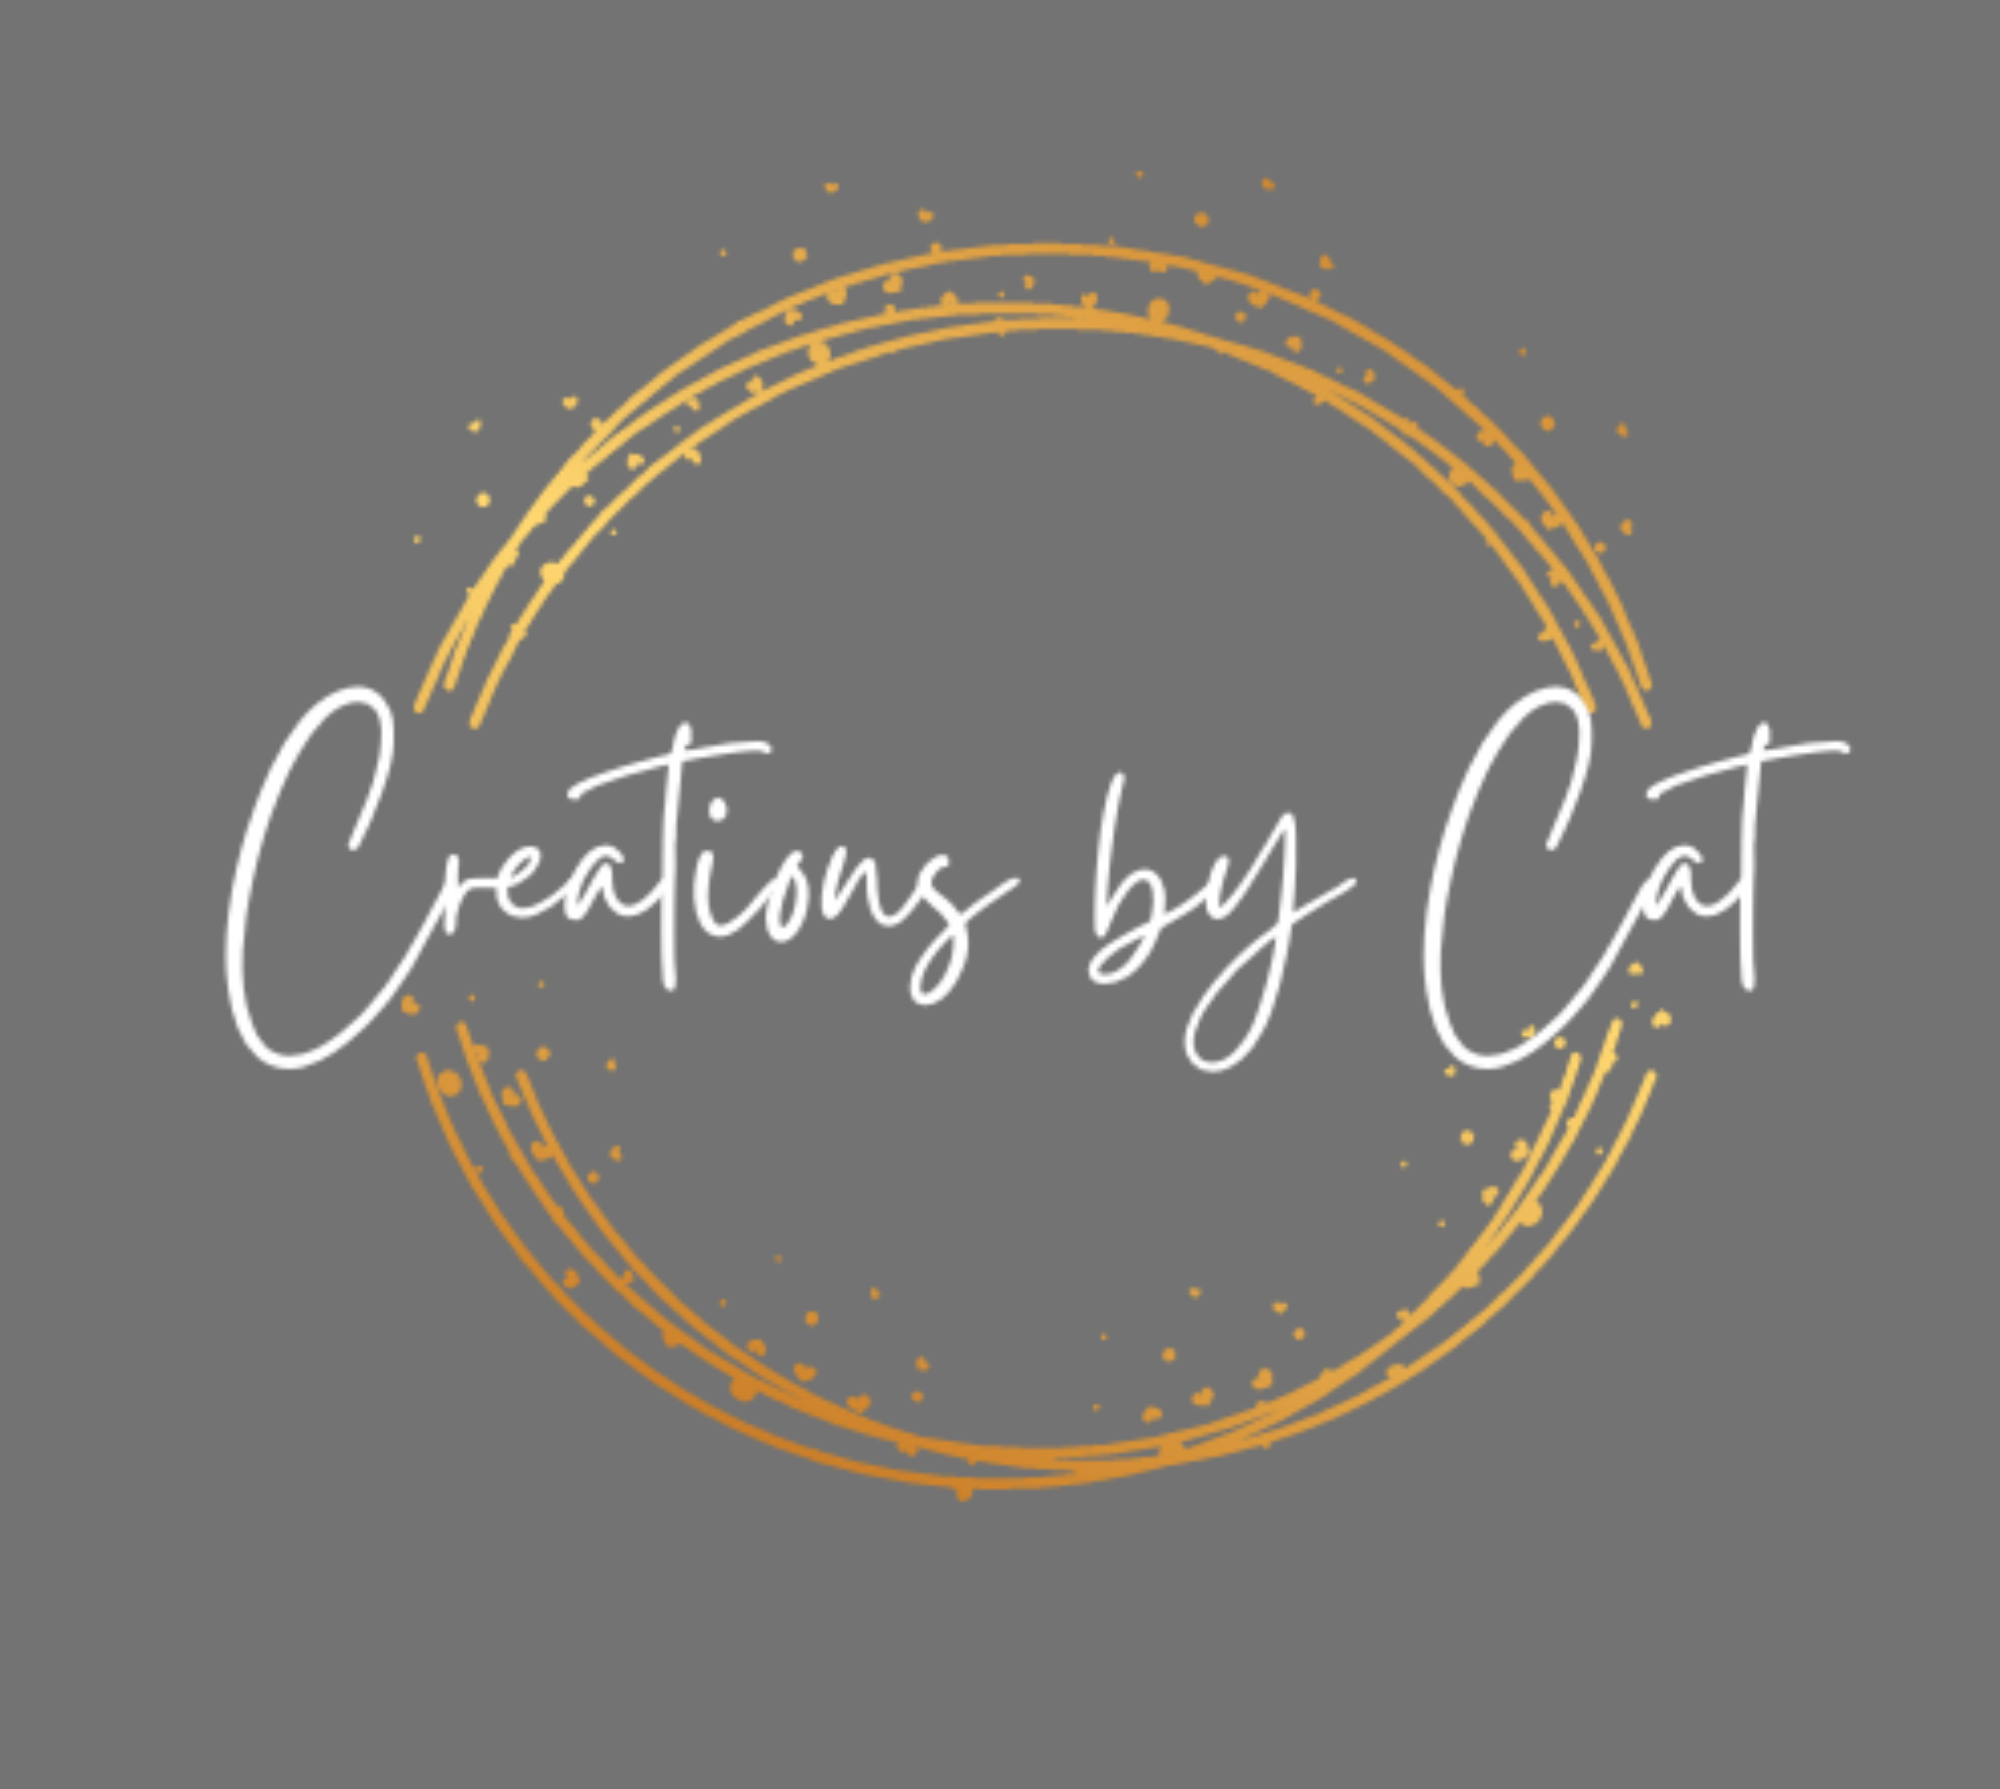 Creations by Cat